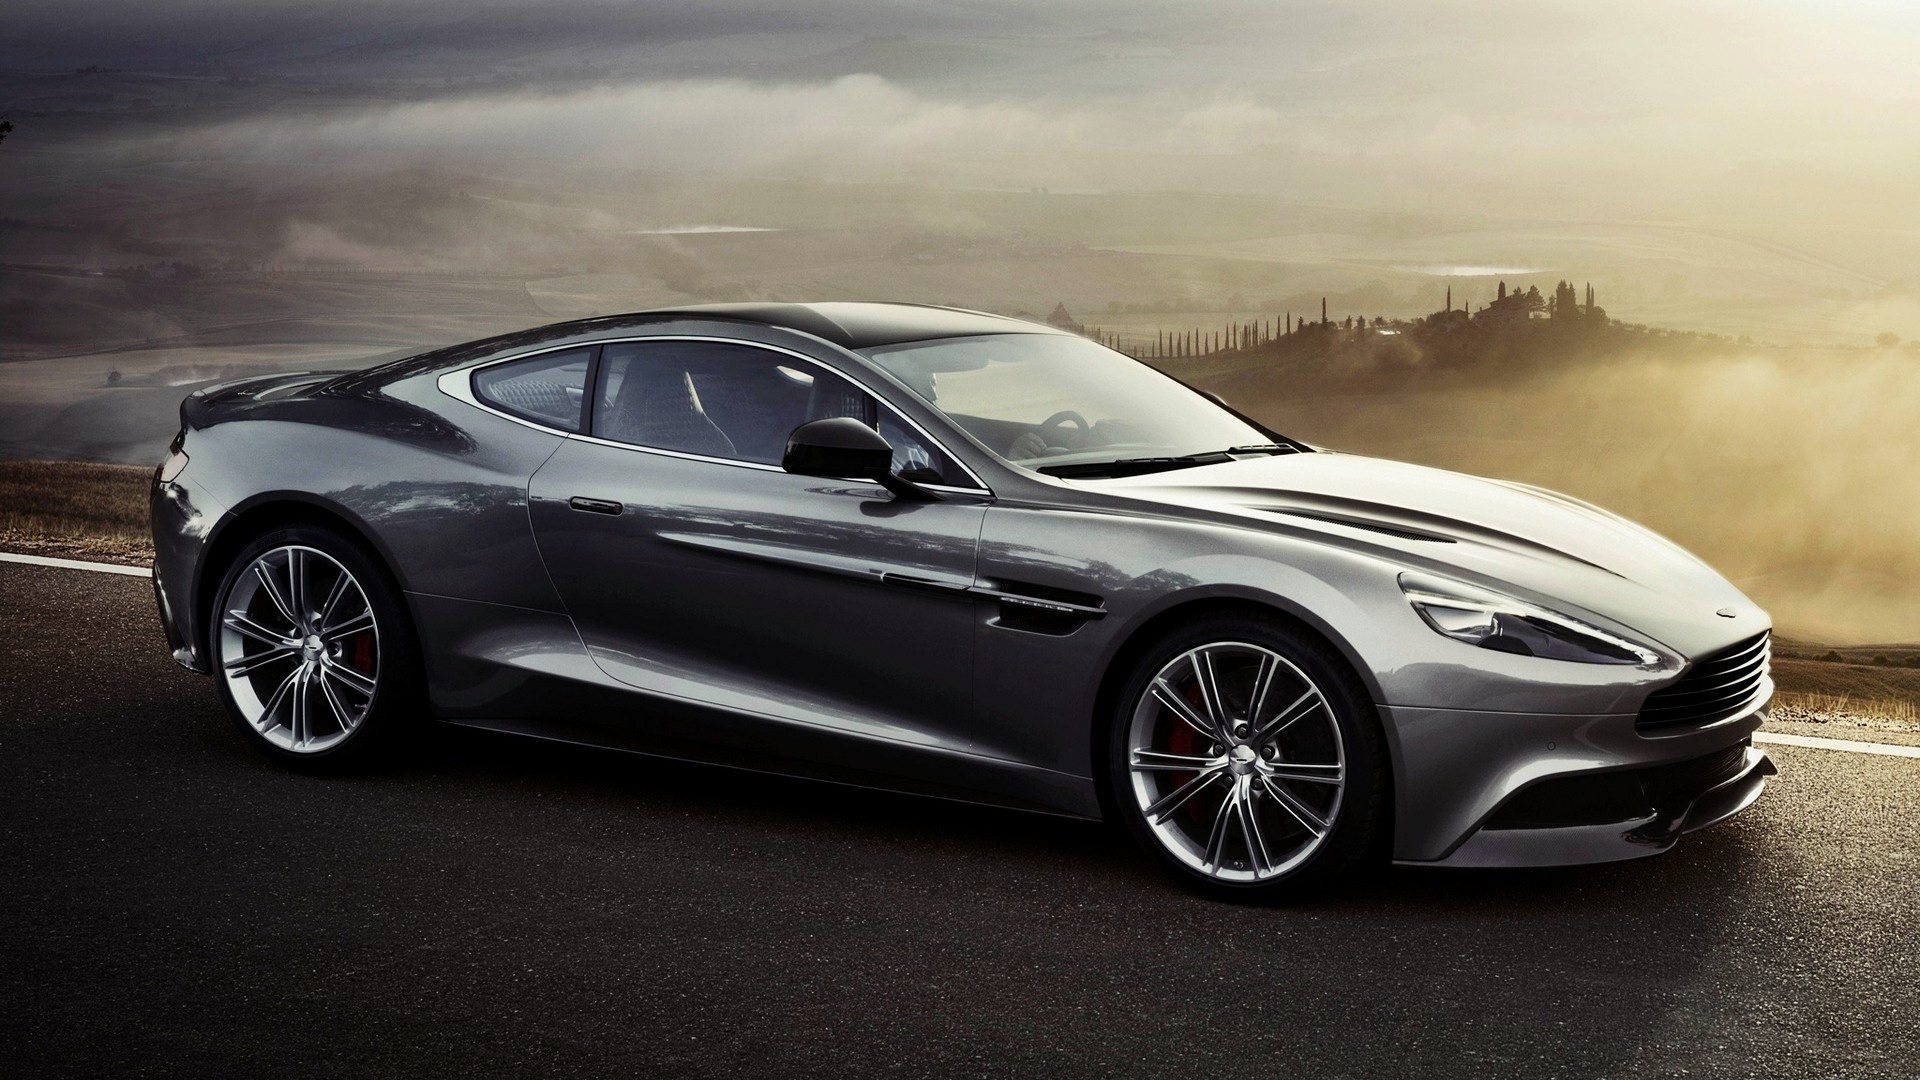 Amazing Aston Martin DBS Pictures & Backgrounds